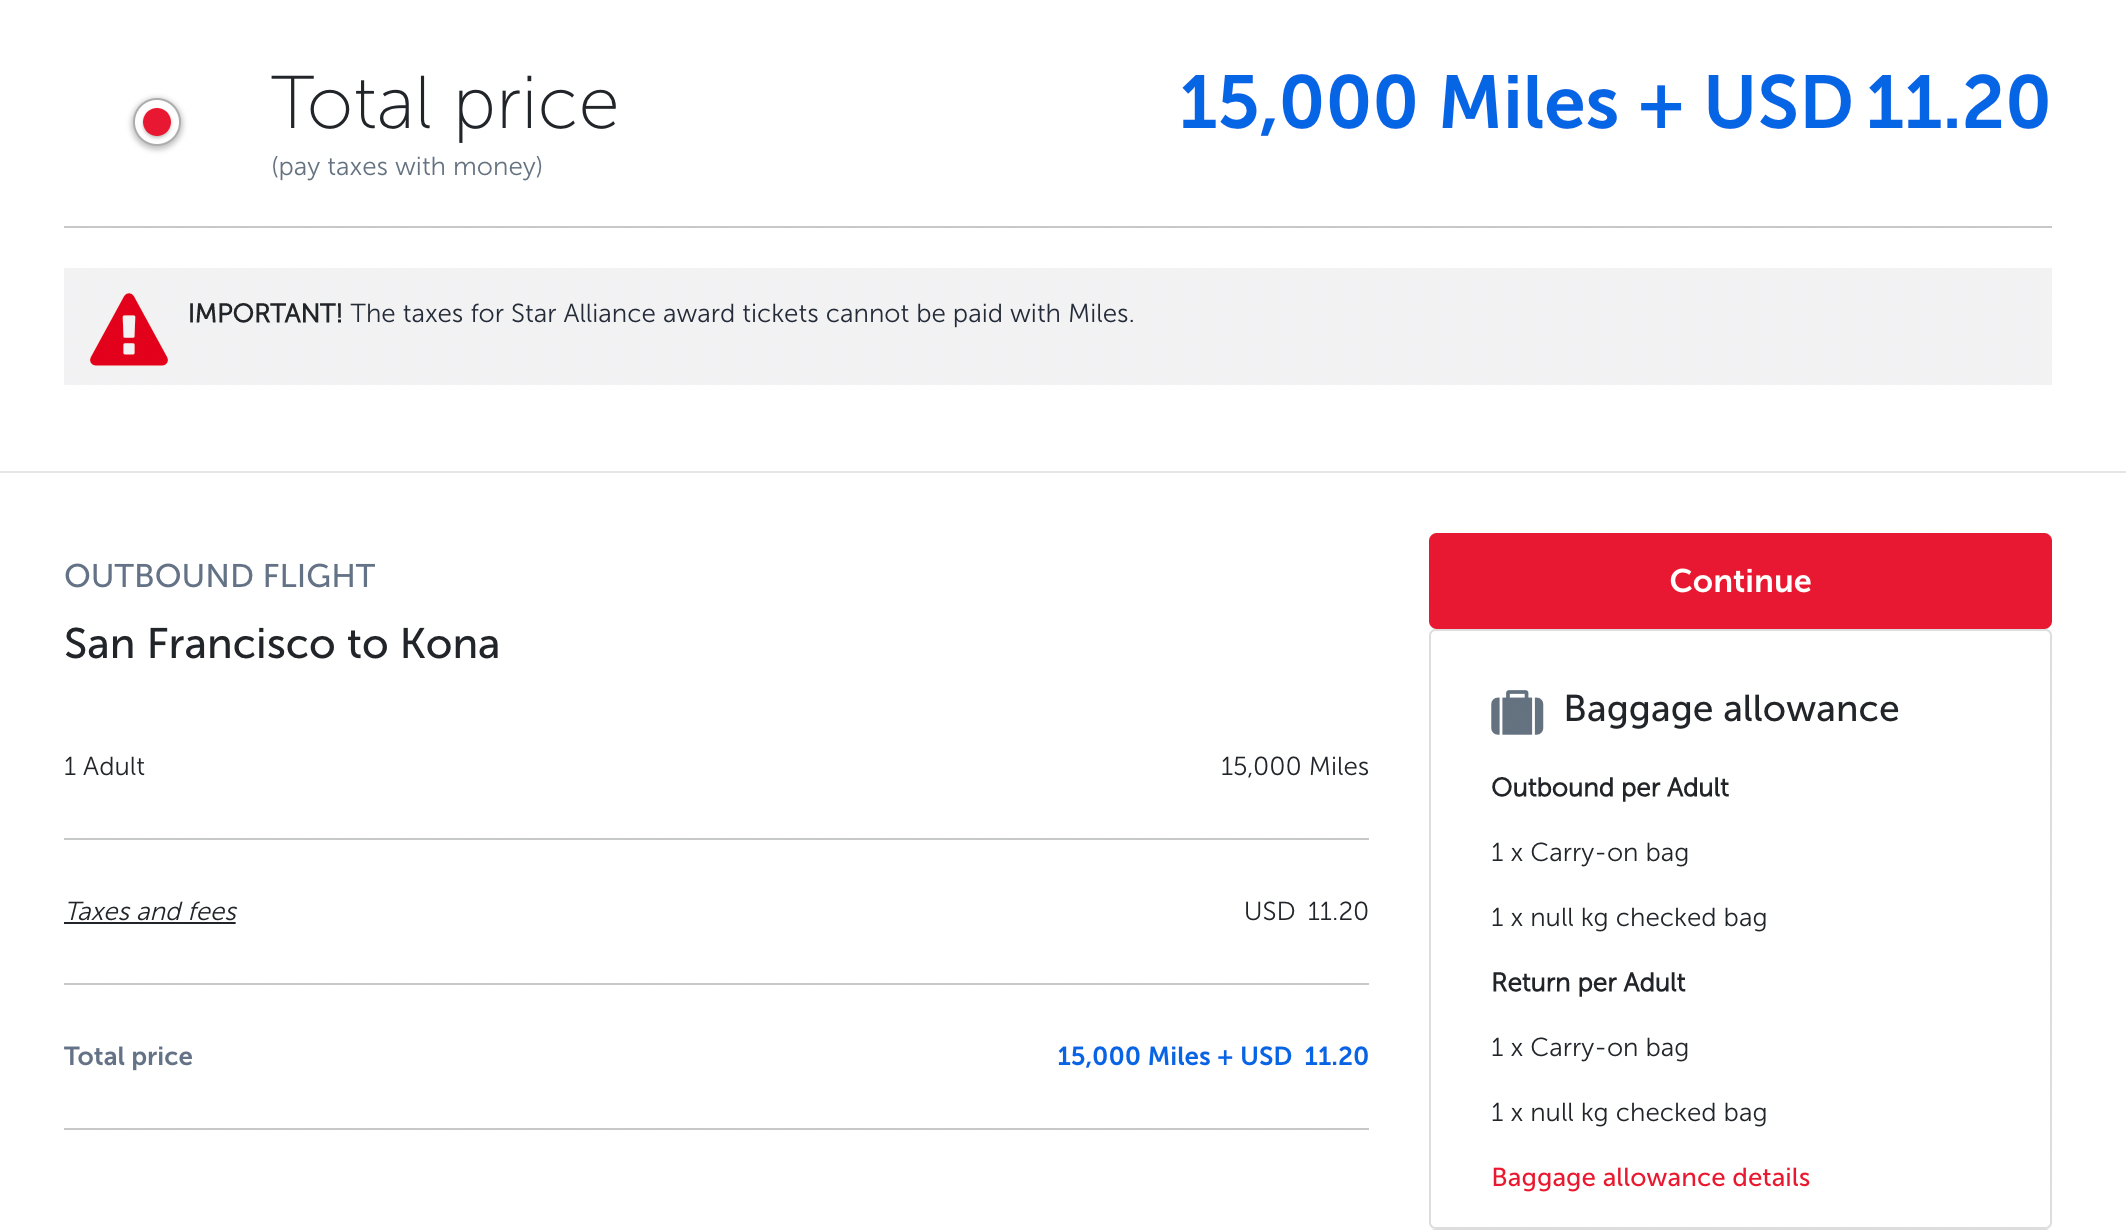 Pricing for a United flight from San Francisco to Kona booked through Turkish Miles and Smiles